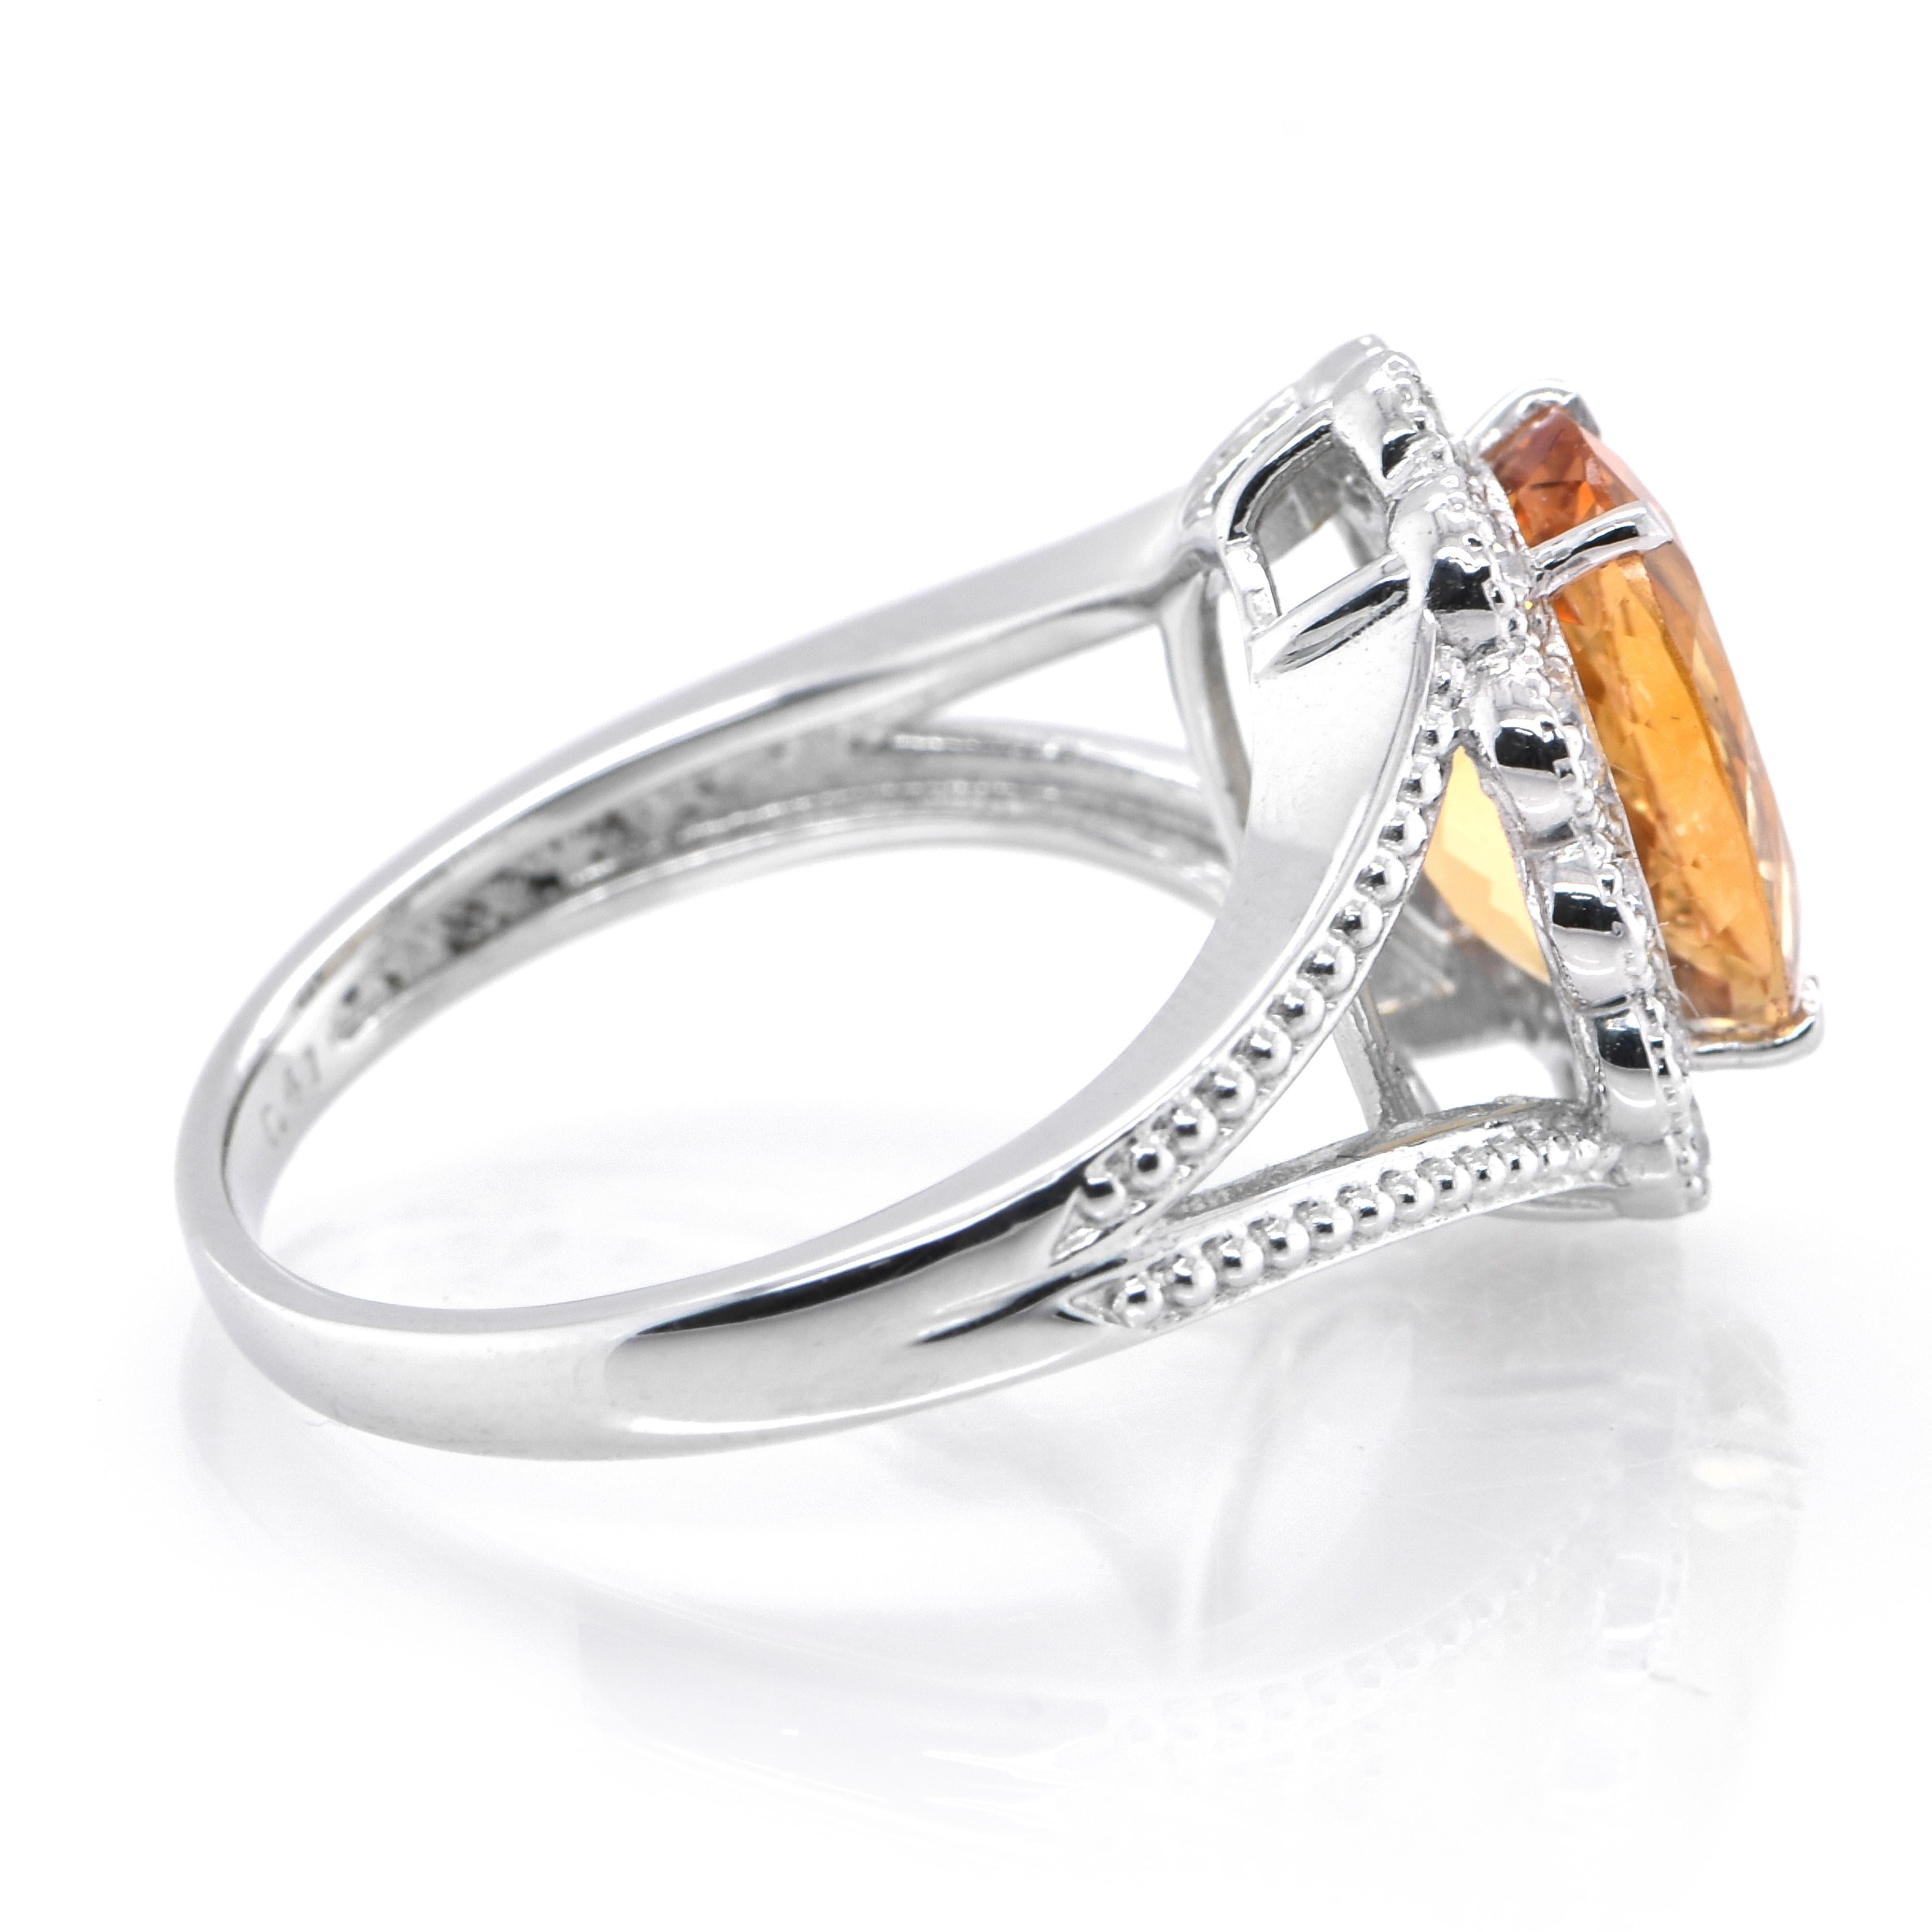 Oval Cut 2.92 Carat Natural Imperial Topaz and Diamond Ring Set in Platinum